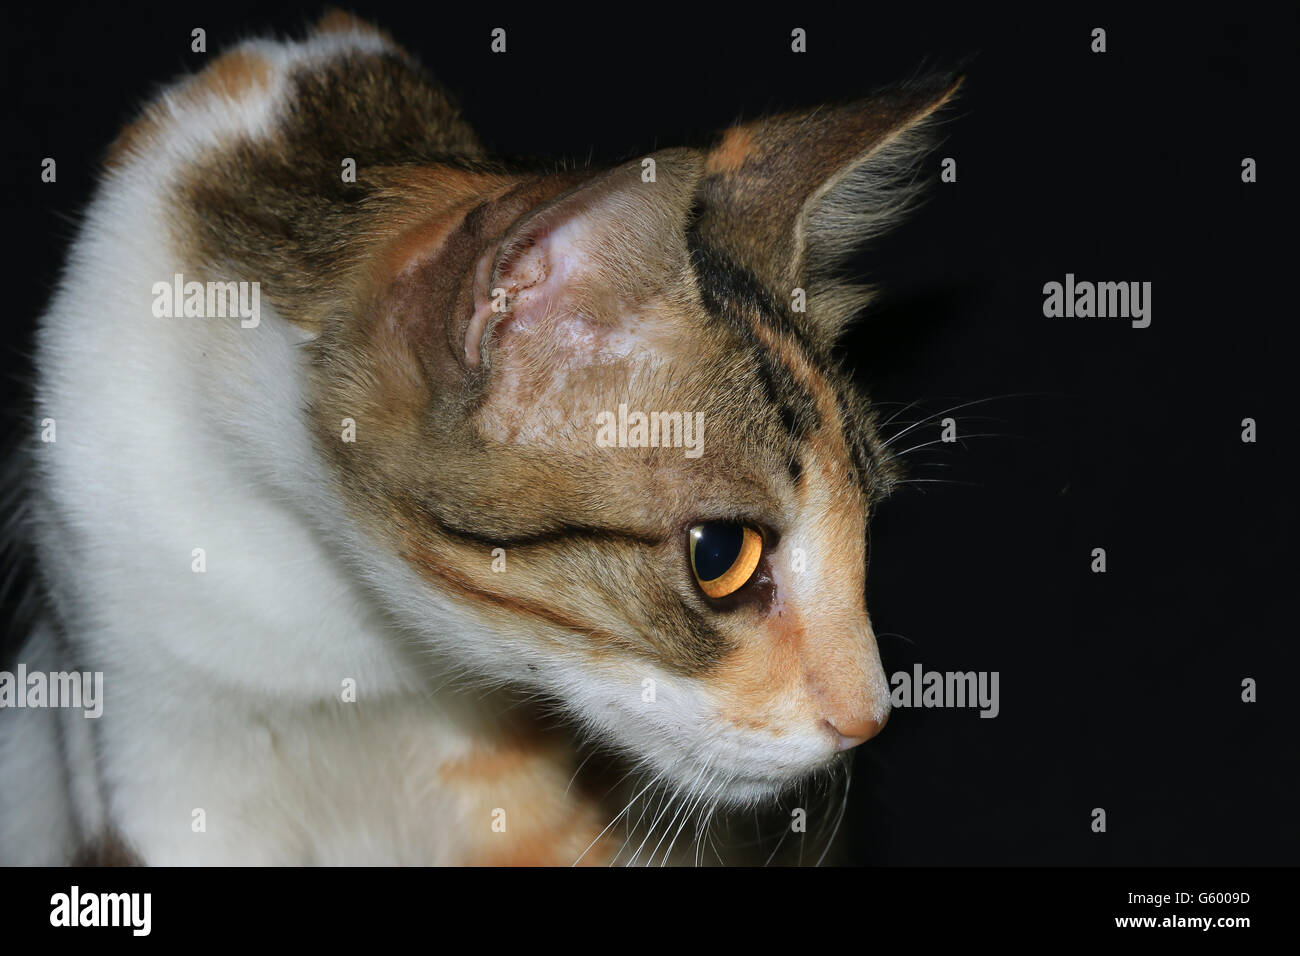 An Indian Domestic Cat Stock Photo